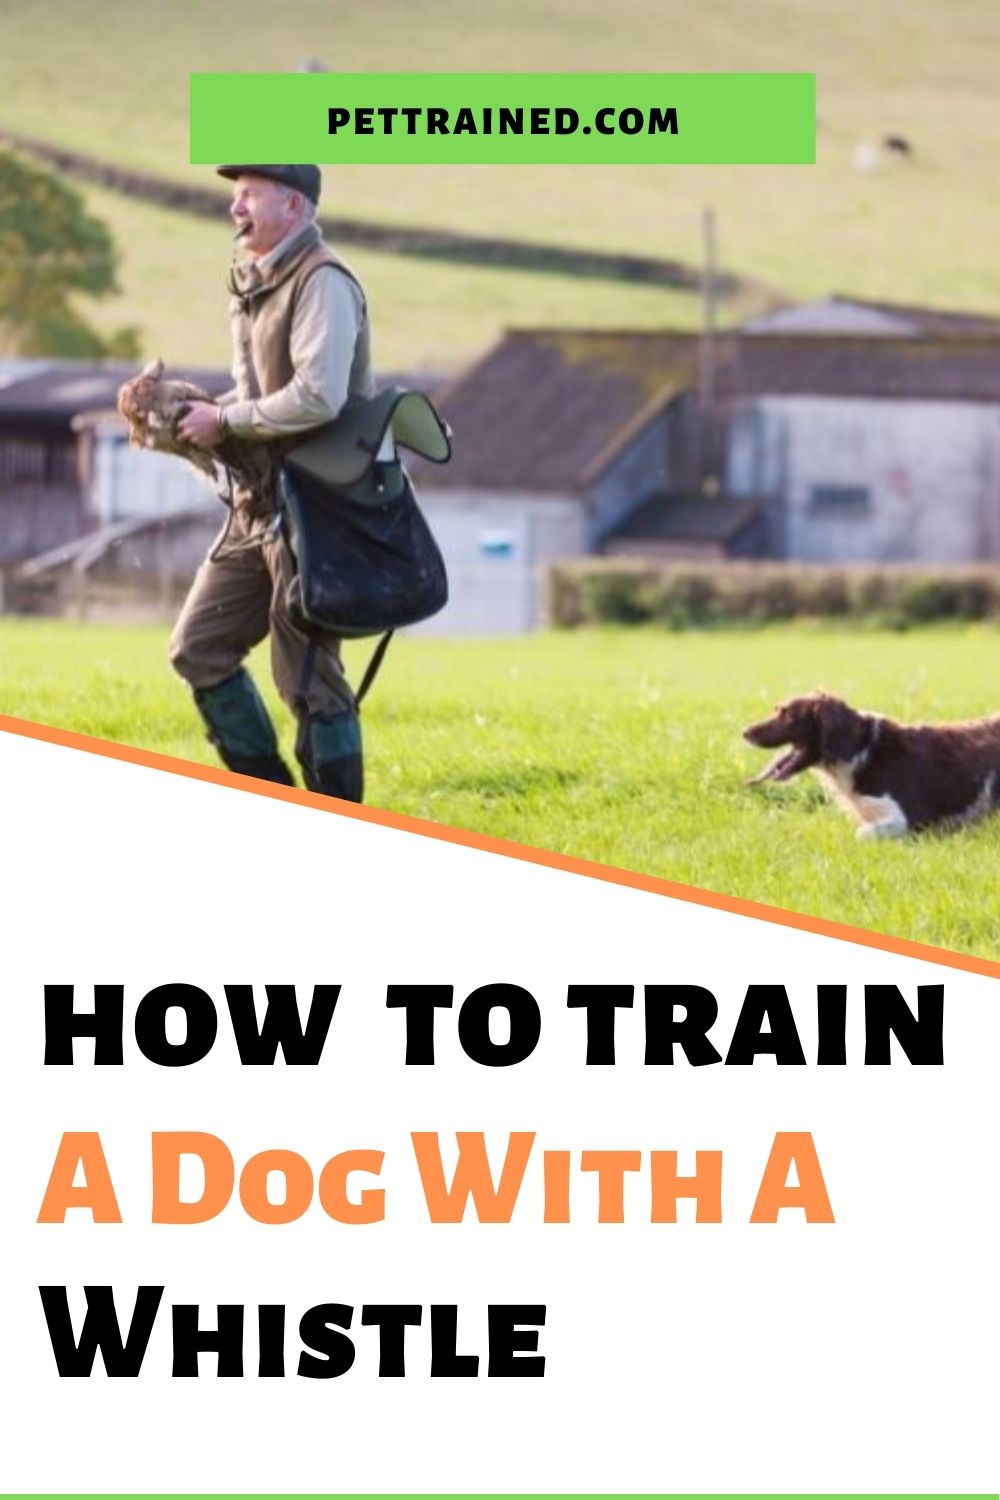 Train your dog with a dog whistle